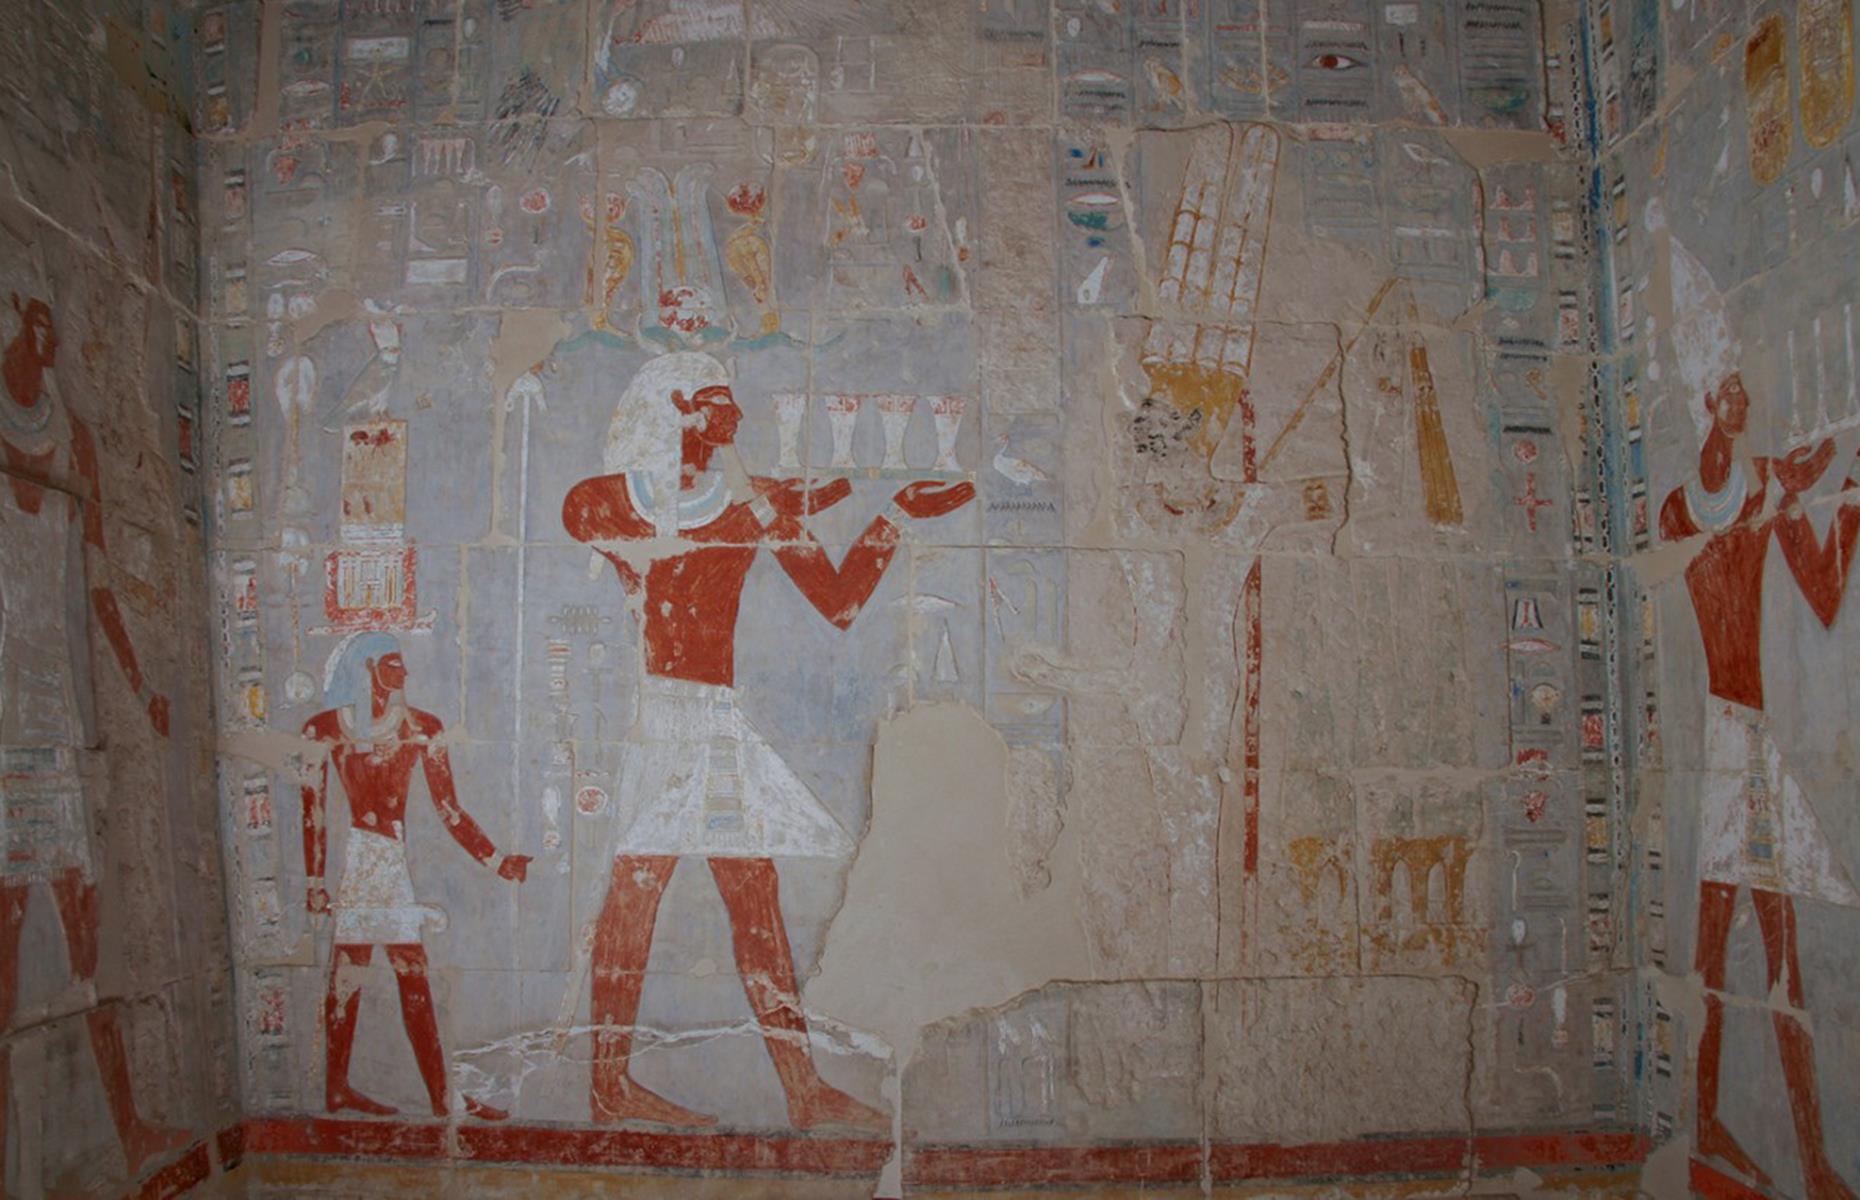 <p>Would-be tomb raiders, get excited: Egypt has just opened up its oldest tomb accessible to the public. The 4,000-year-old Tomb of Meru, situated on the Nile's western bank in Luxor, was built for a high-ranking official in the court of King Mentuhotep II (who died in 2004 BC). Meru's tomb, located on the North Asasif necropolis, is close to the mortuary temple of the pharaoh, implying the official was of considerable importance. Inside the rock-hewn tomb is a collection of murals and a stone sarcophagus, which Egyptology enthusiasts can now see with their own eyes.</p>